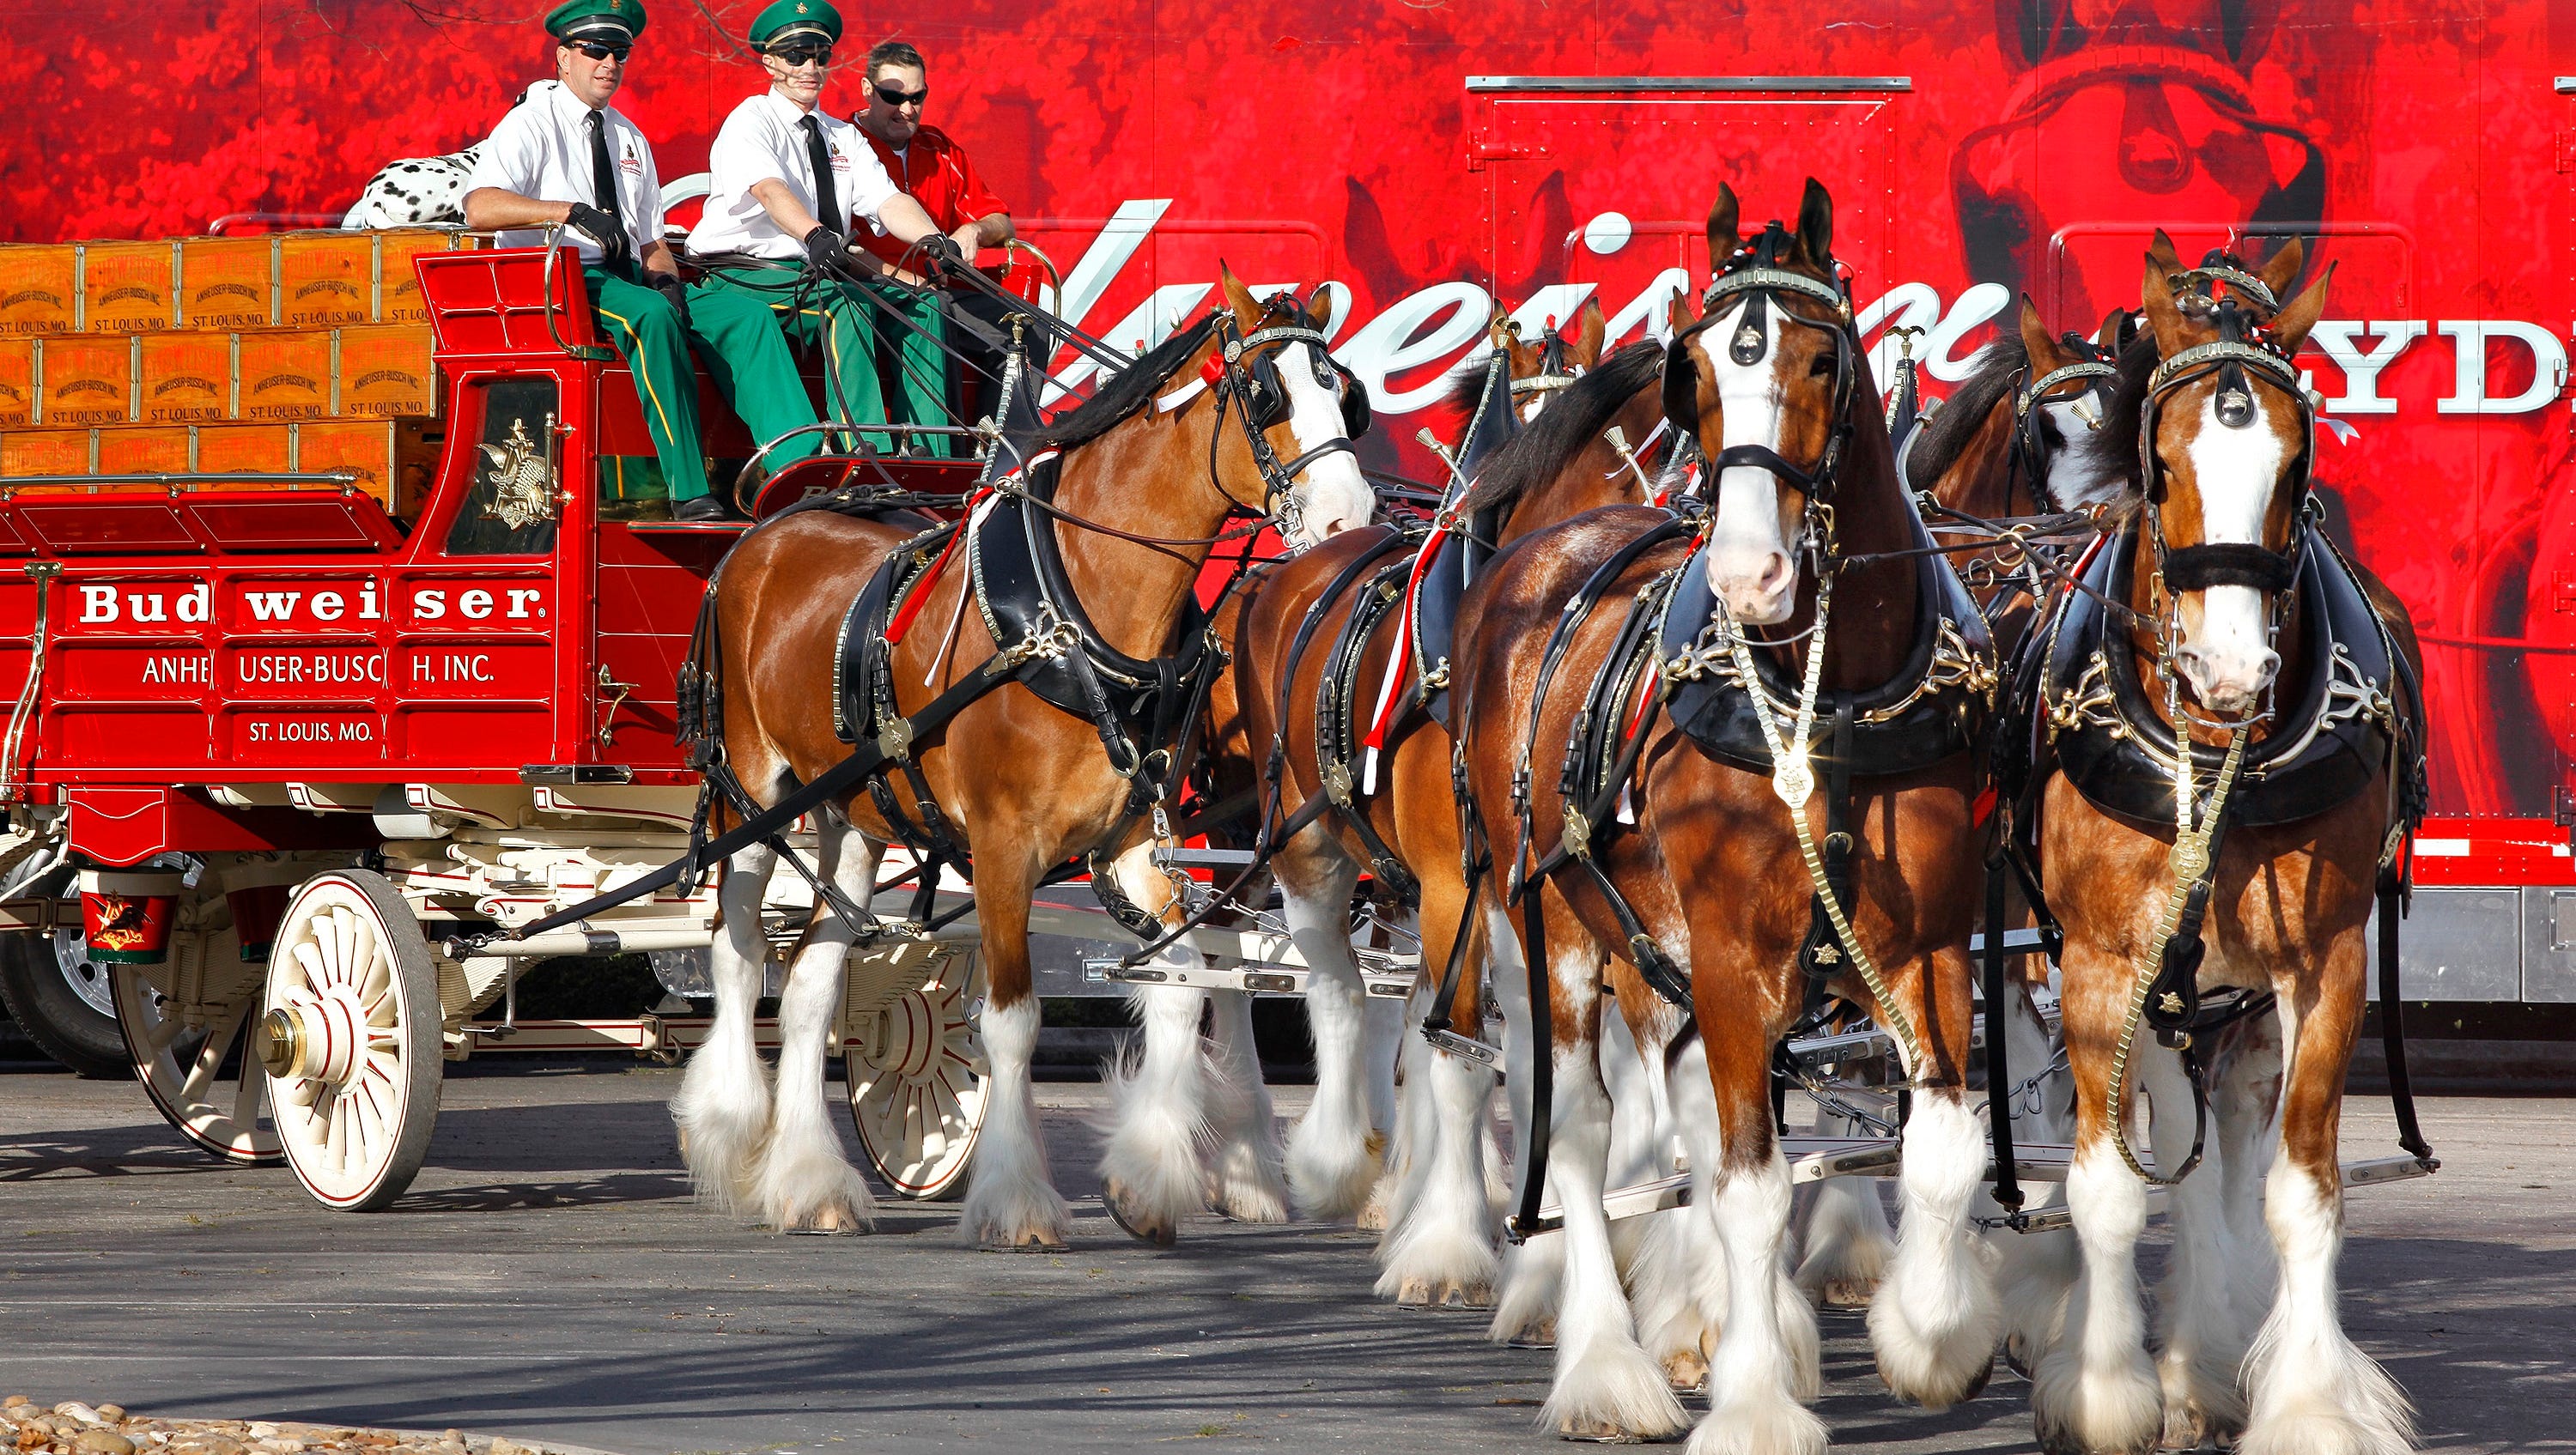 Super Bowl LII is without the Budweiser Clydesdales, or much purpose